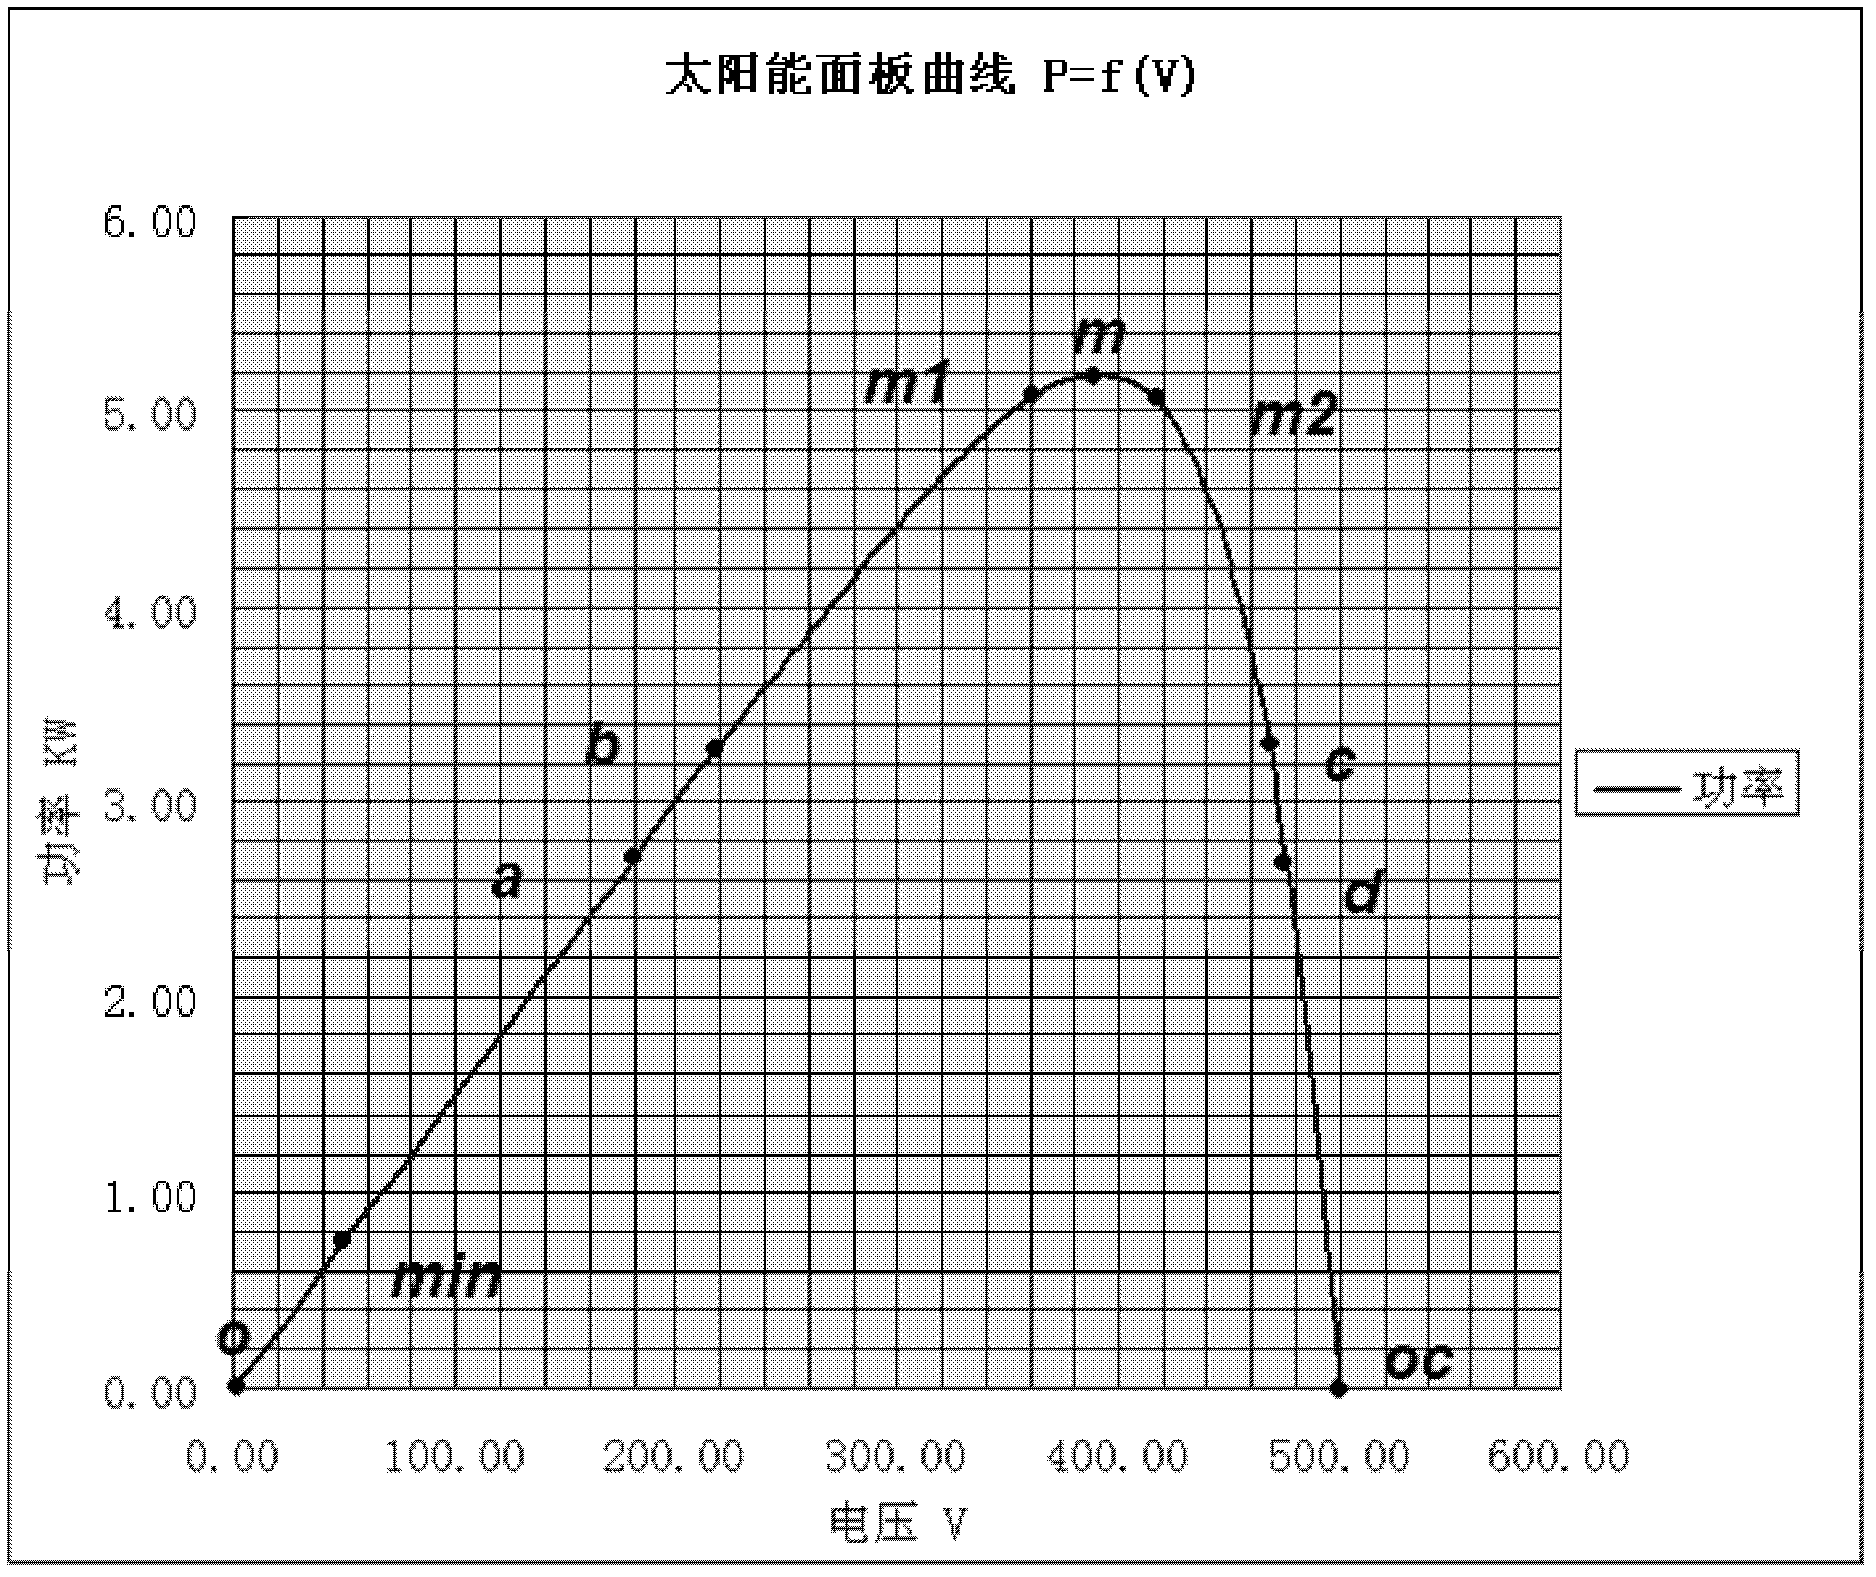 Maximum power point tracking control method for photovoltaic inverter